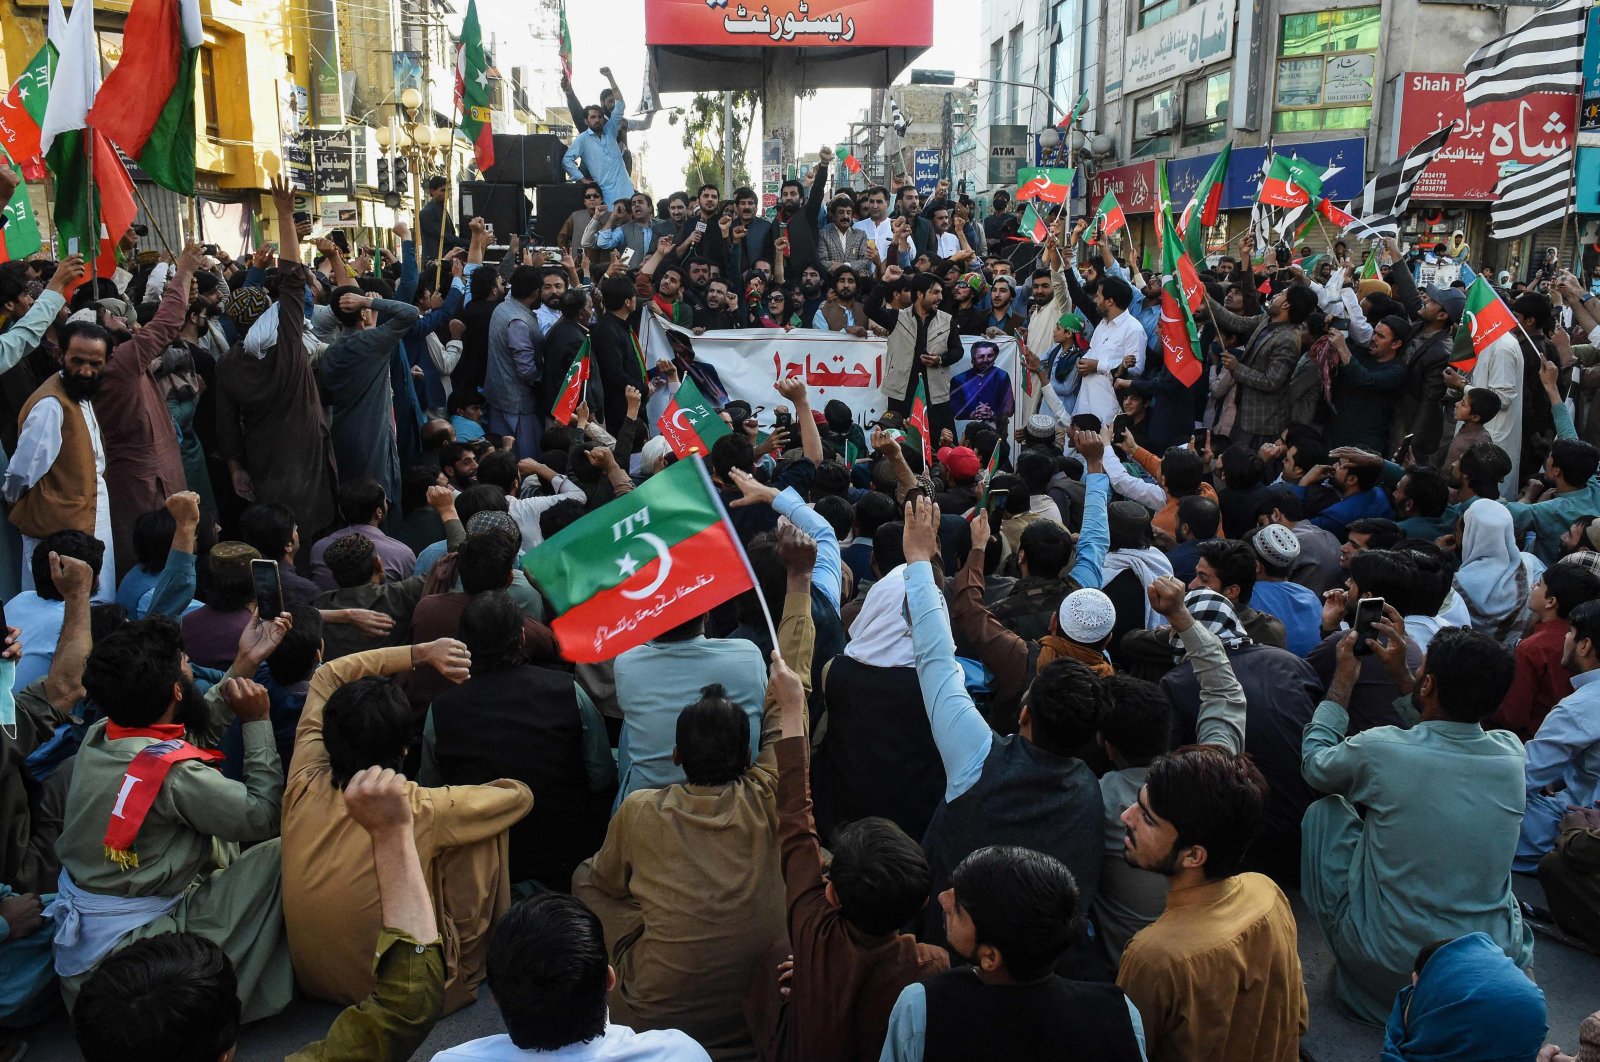 Supporters of former Pakistani prime minister Imran Khan, take part in a protest as they block the main road a day after the assassination attempt on Khan, in Quetta on November 4, 2022. (AFP Photo)